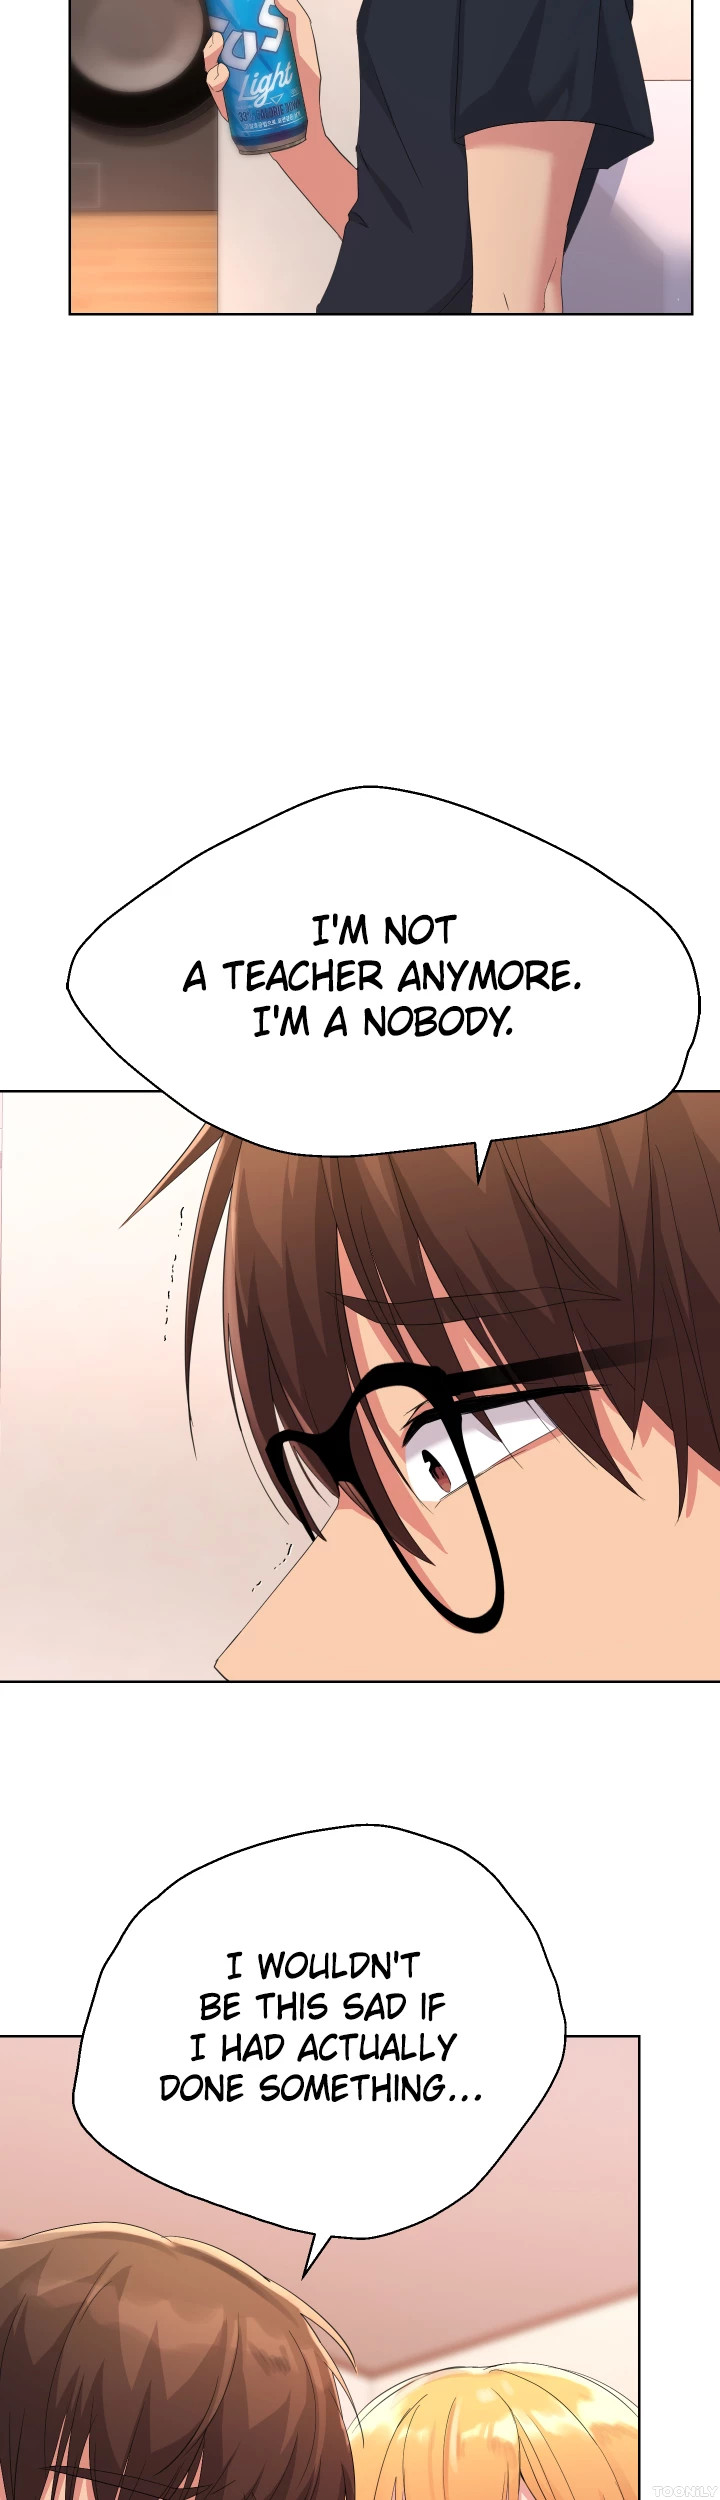 Girls I Used to Teach - Chapter 2 Page 57